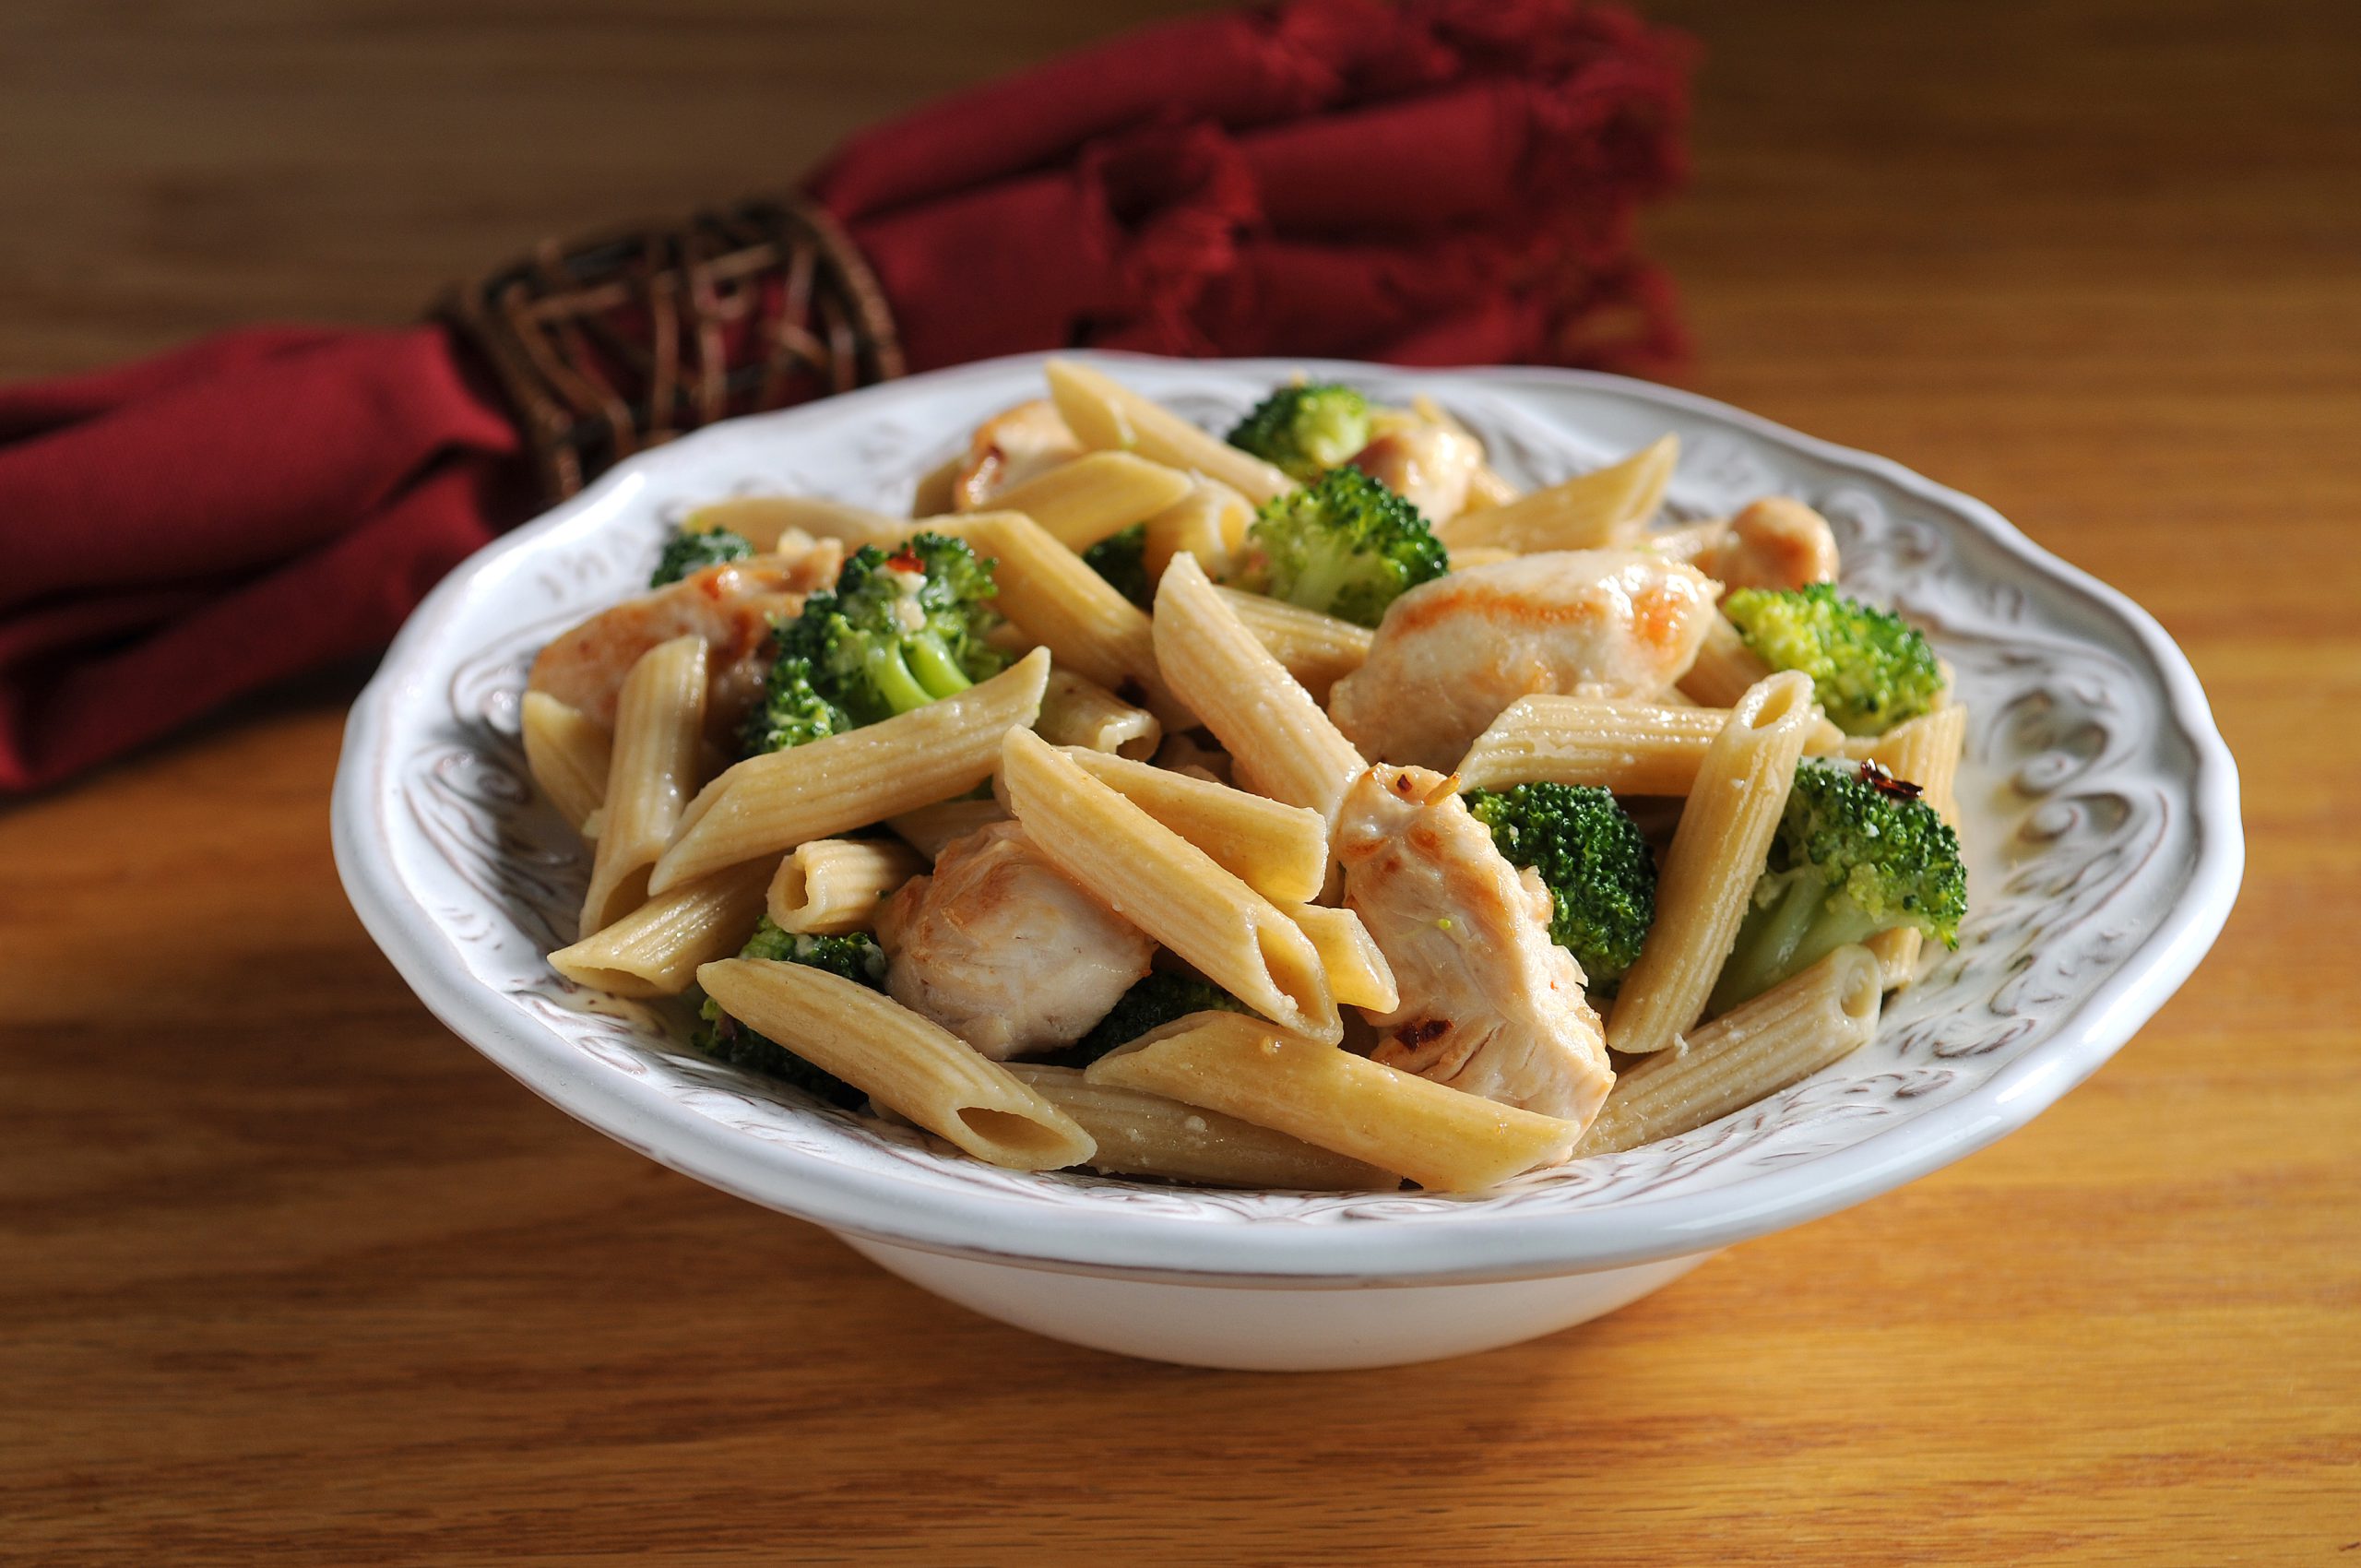 Chicken, broccoli, and penne with garlic and red pepper flakes